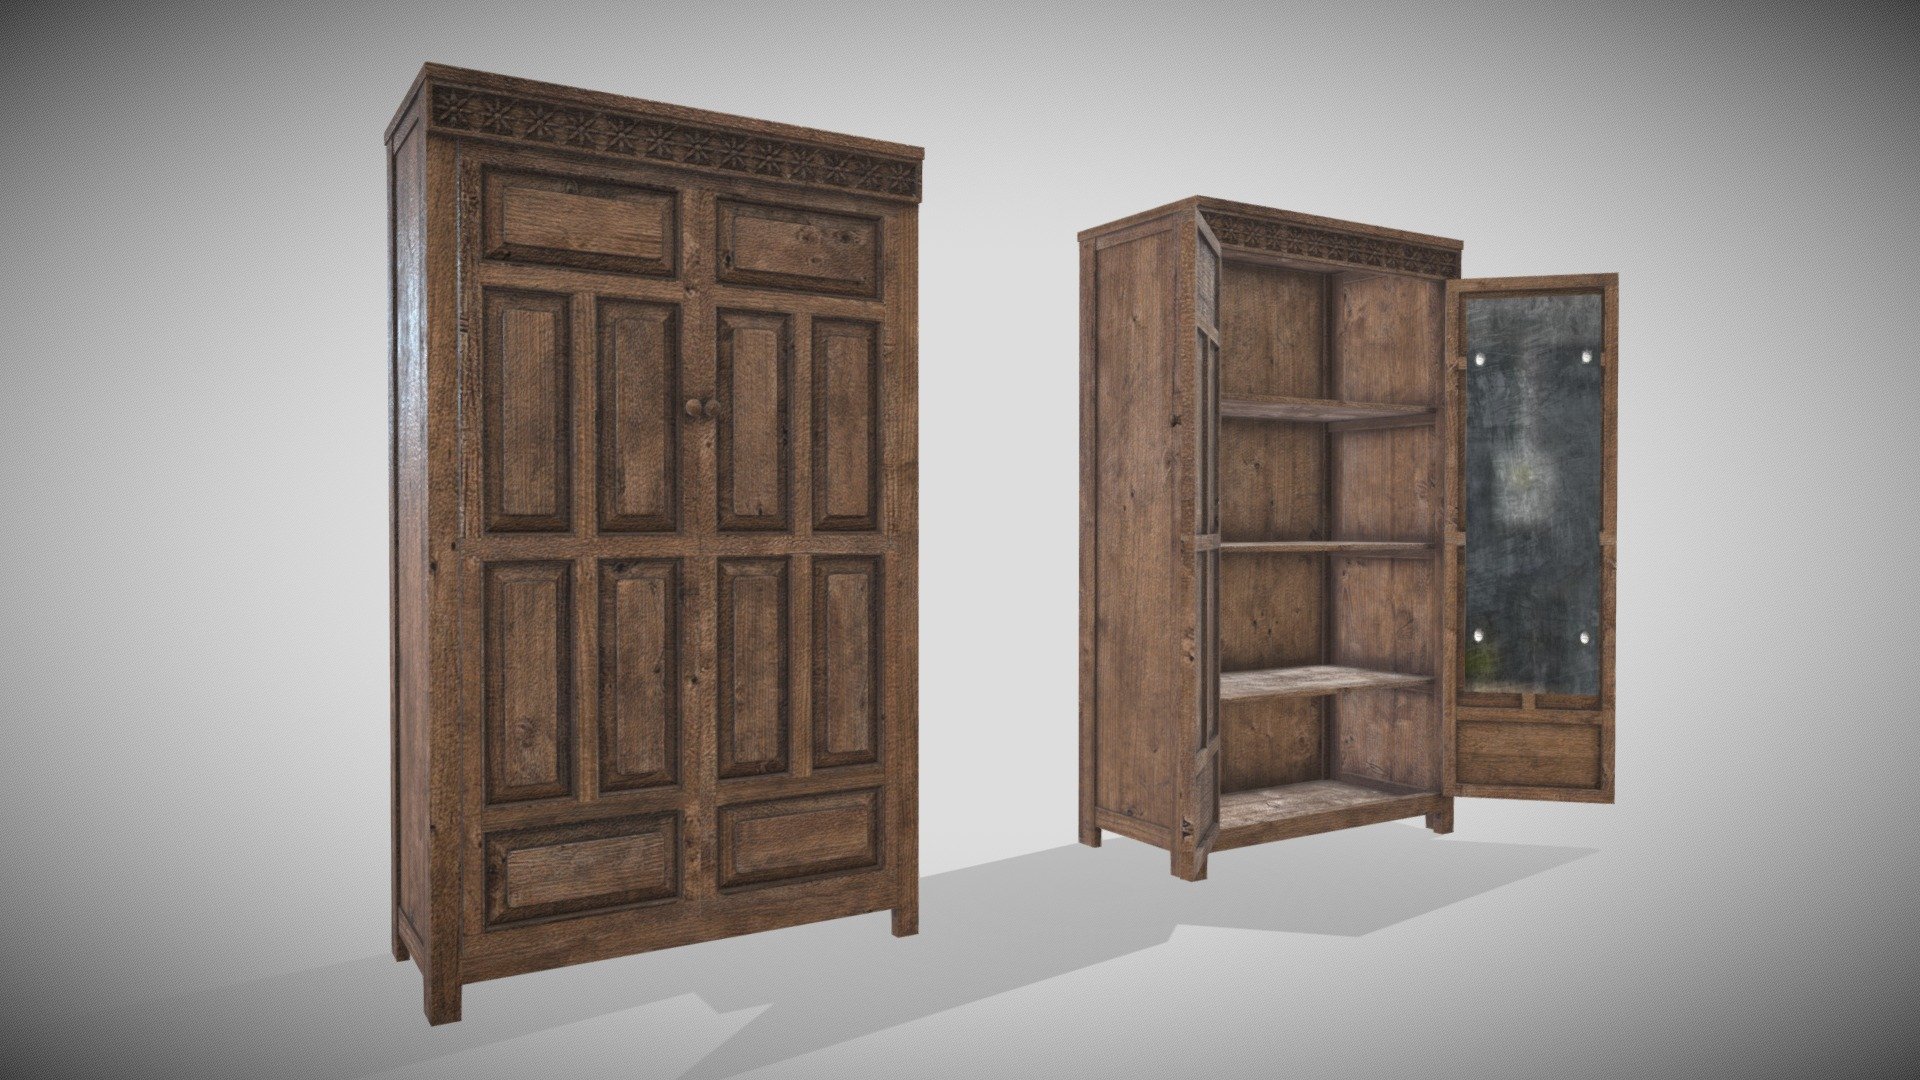 4k Materials PBR

HP is for Himachal Pradesh - HP Furniture - Armadio Open and Close - Buy Royalty Free 3D model by Francesco Coldesina (@topfrank2013) 3d model